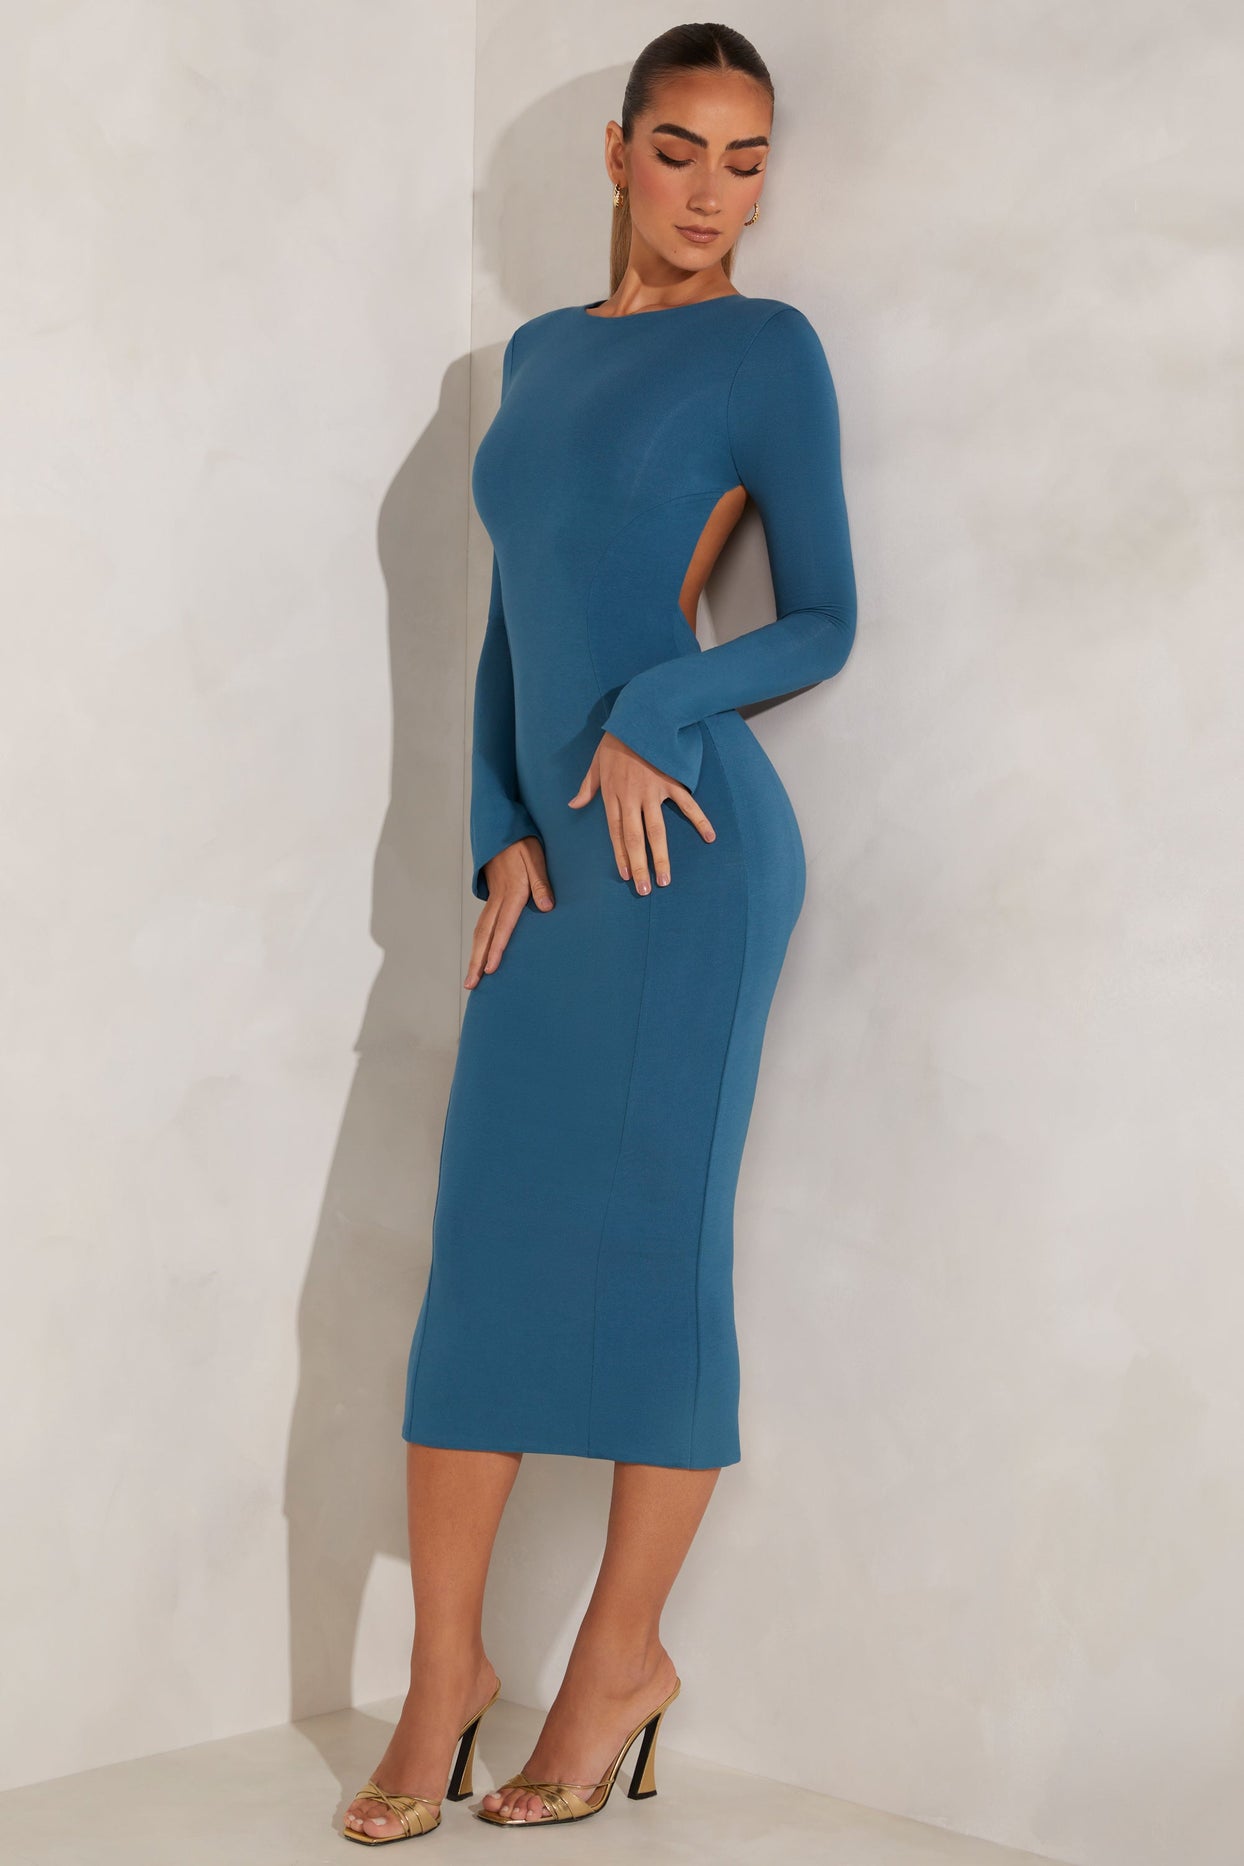 High Neck Long Sleeve Open Back Midaxi Dress in Teal